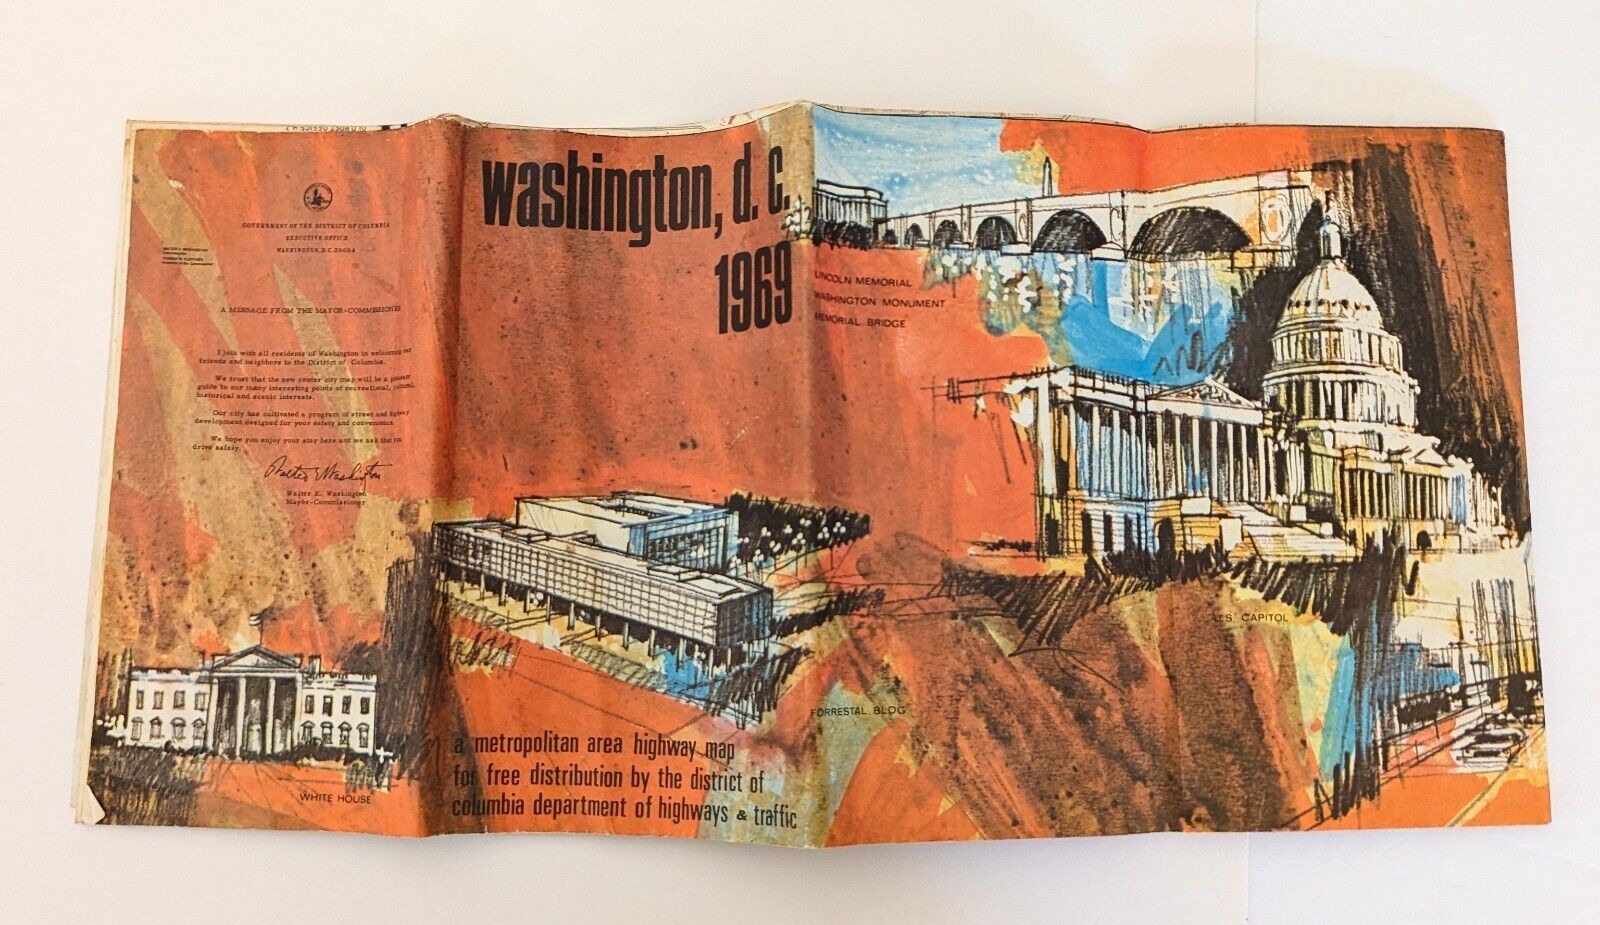 Vintage 1969 Washington, D.C. Official Road Map from Department of Highways